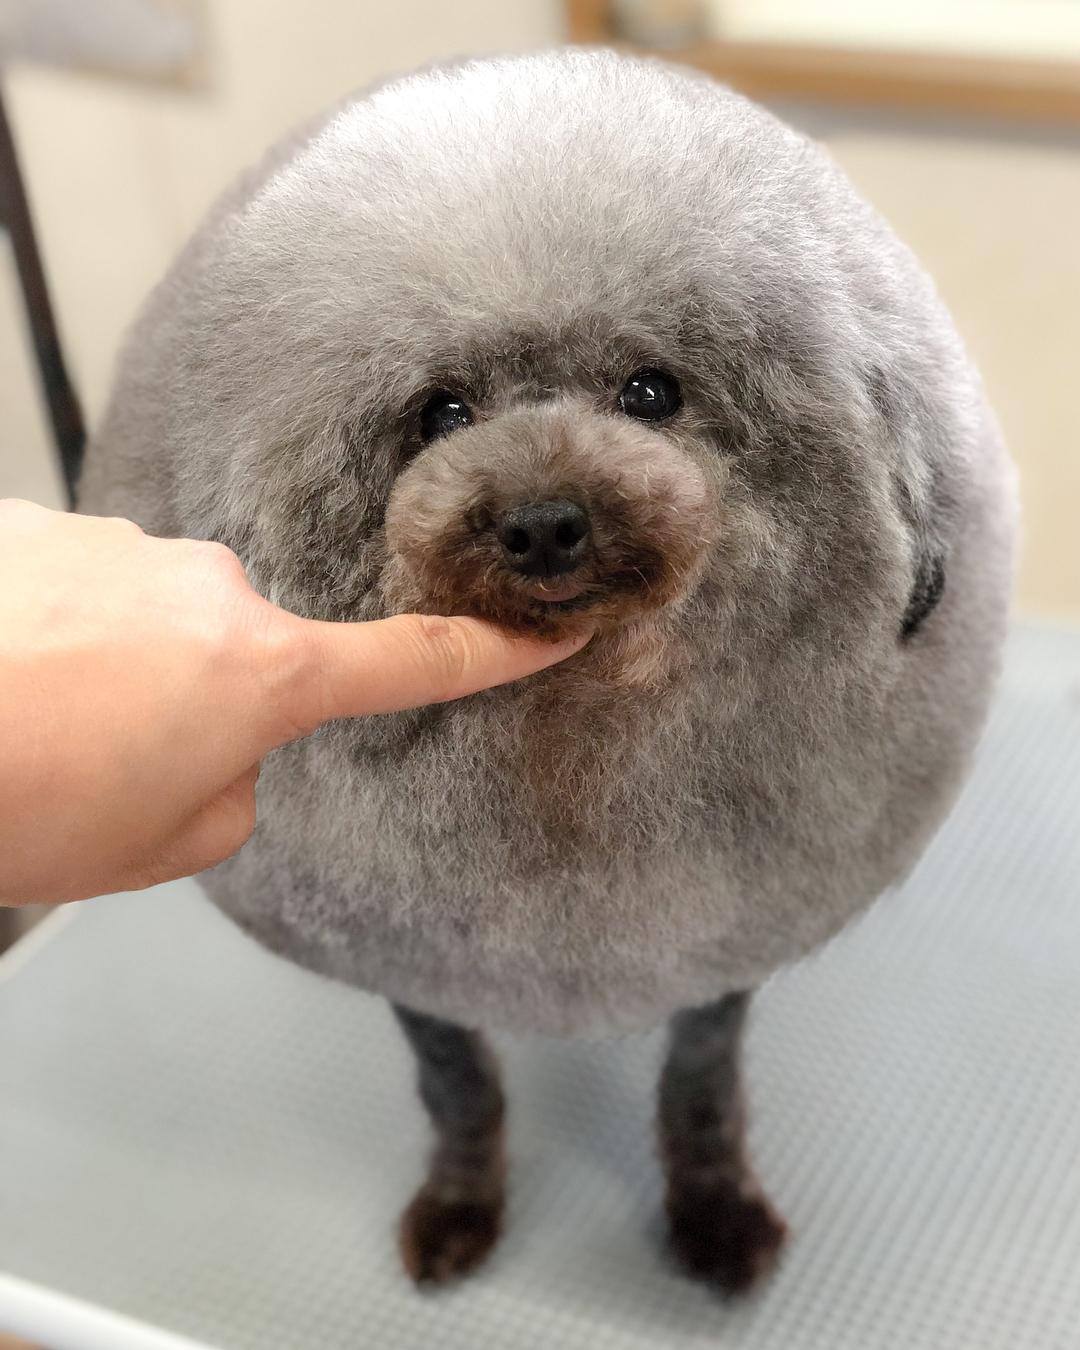 close-up photo of a fluffy dog